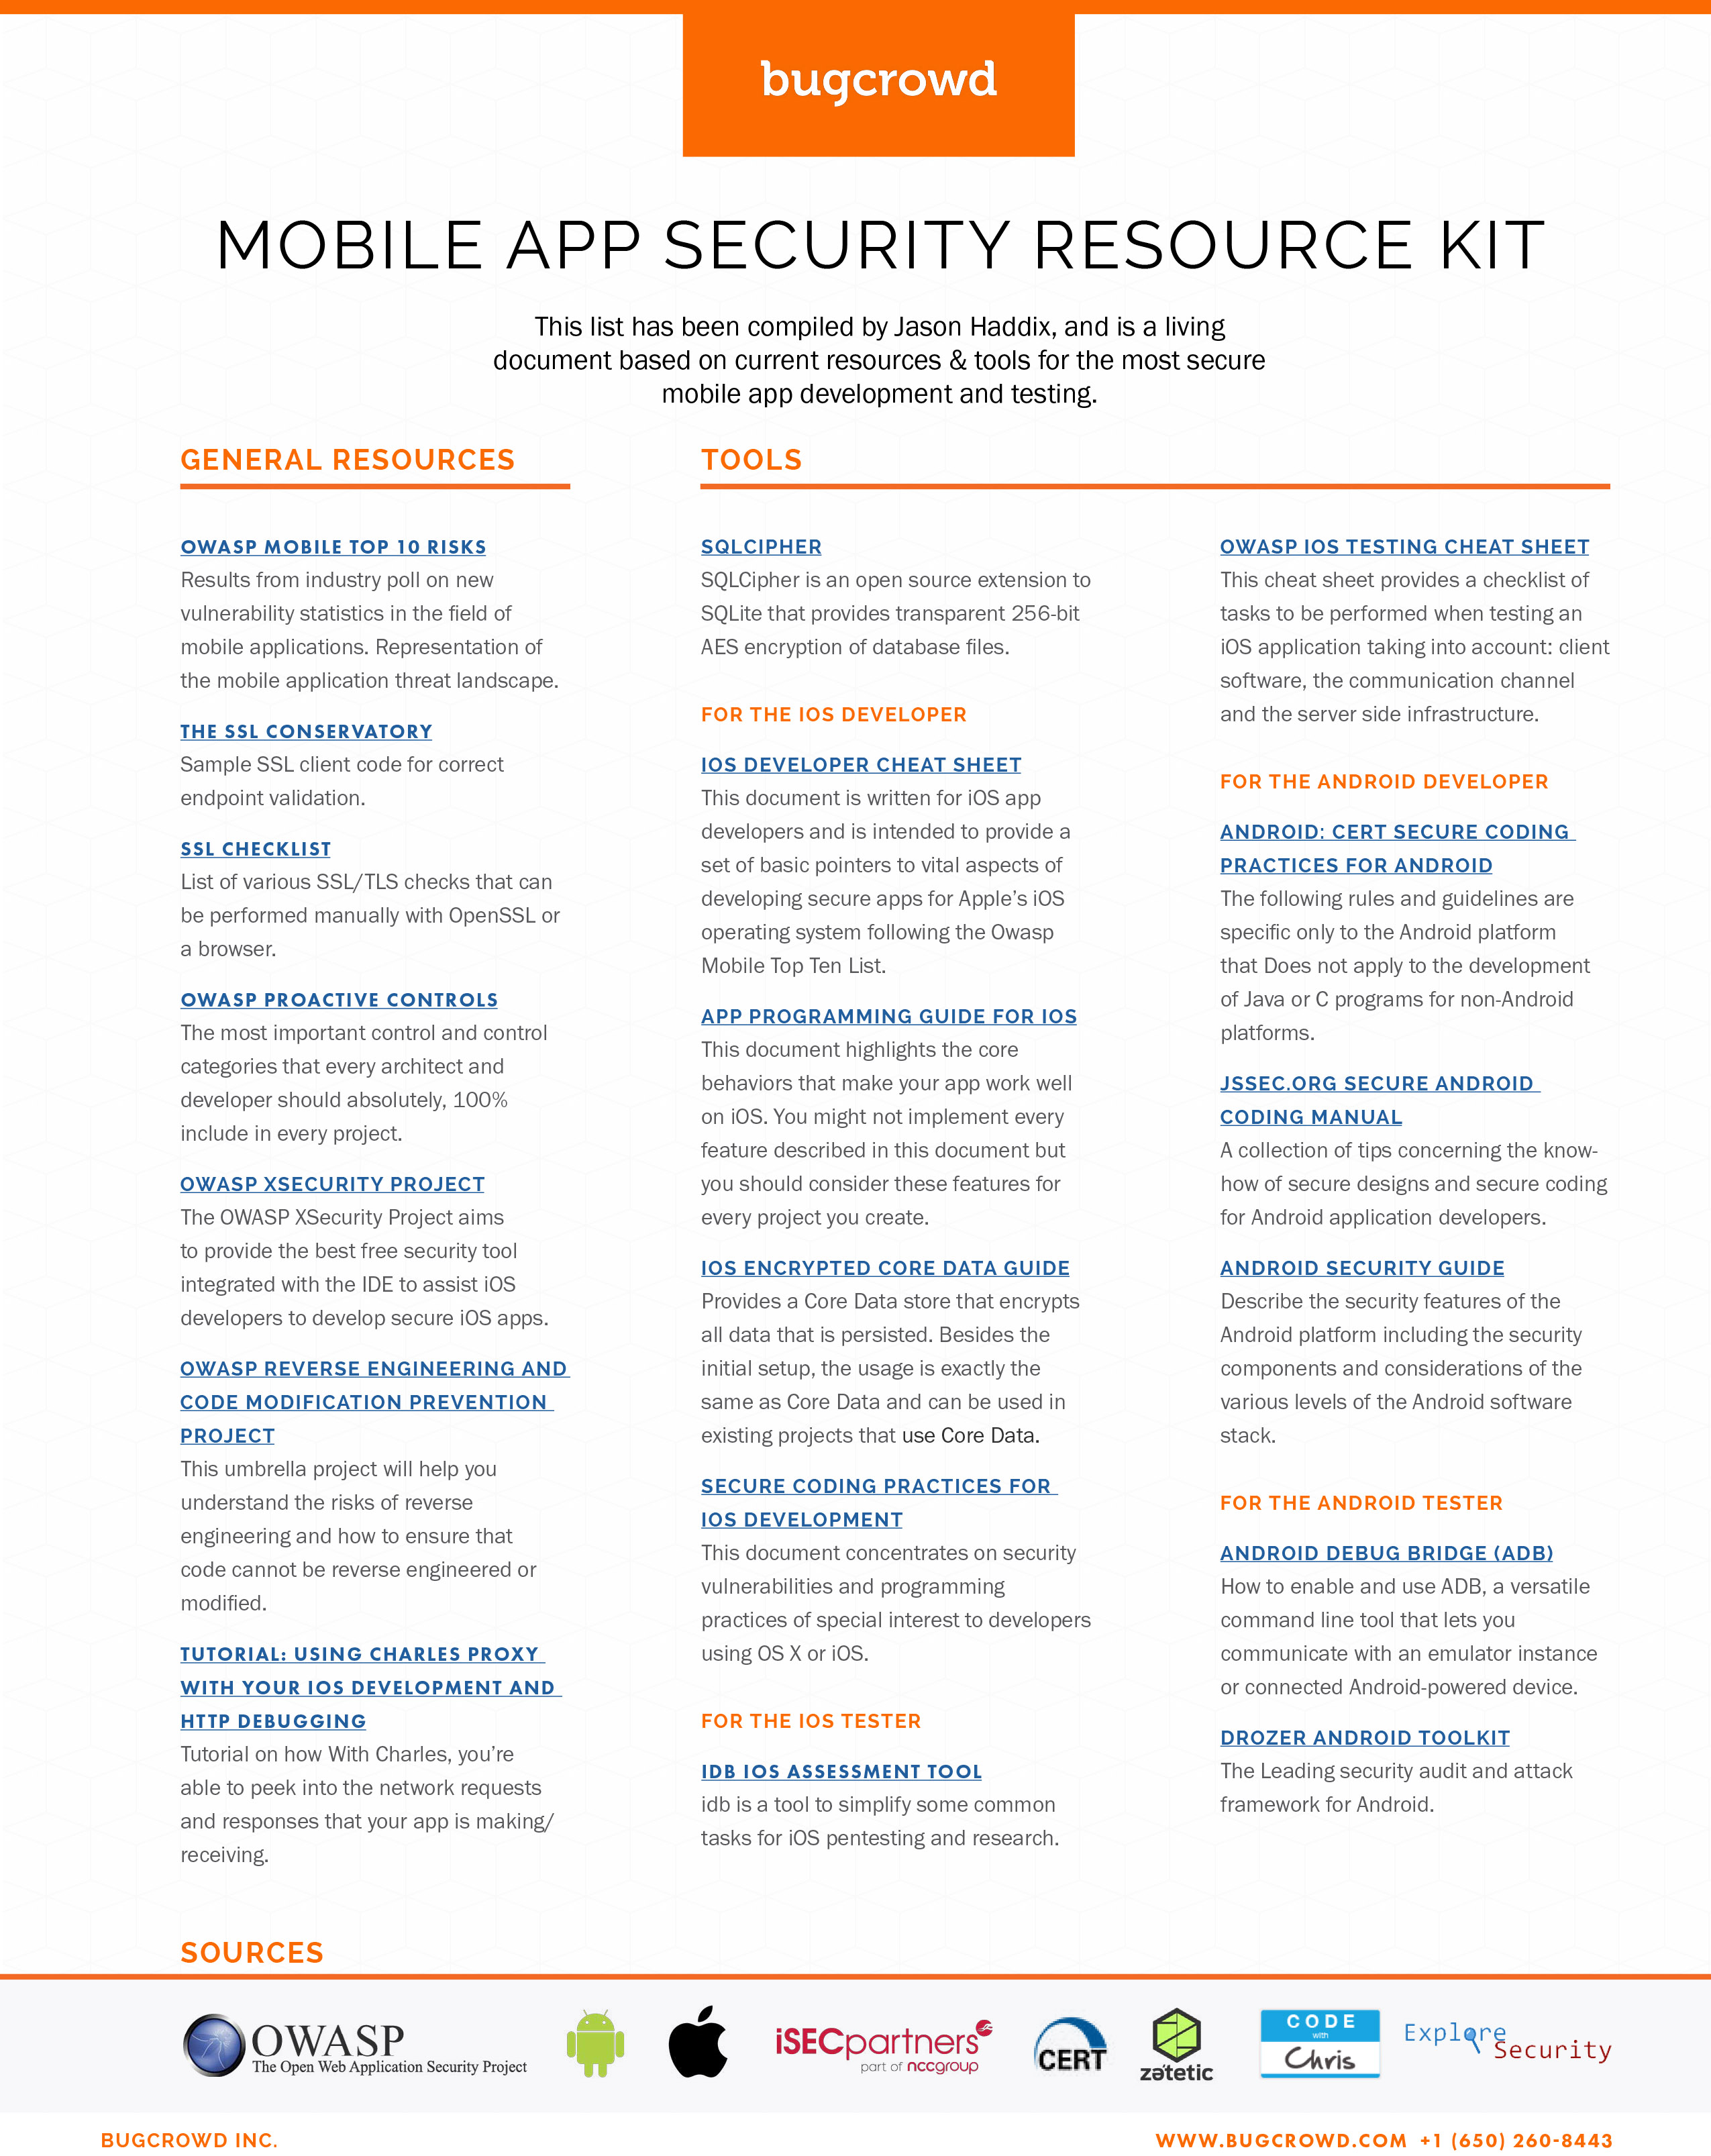 Mobile App Security Resource Kit